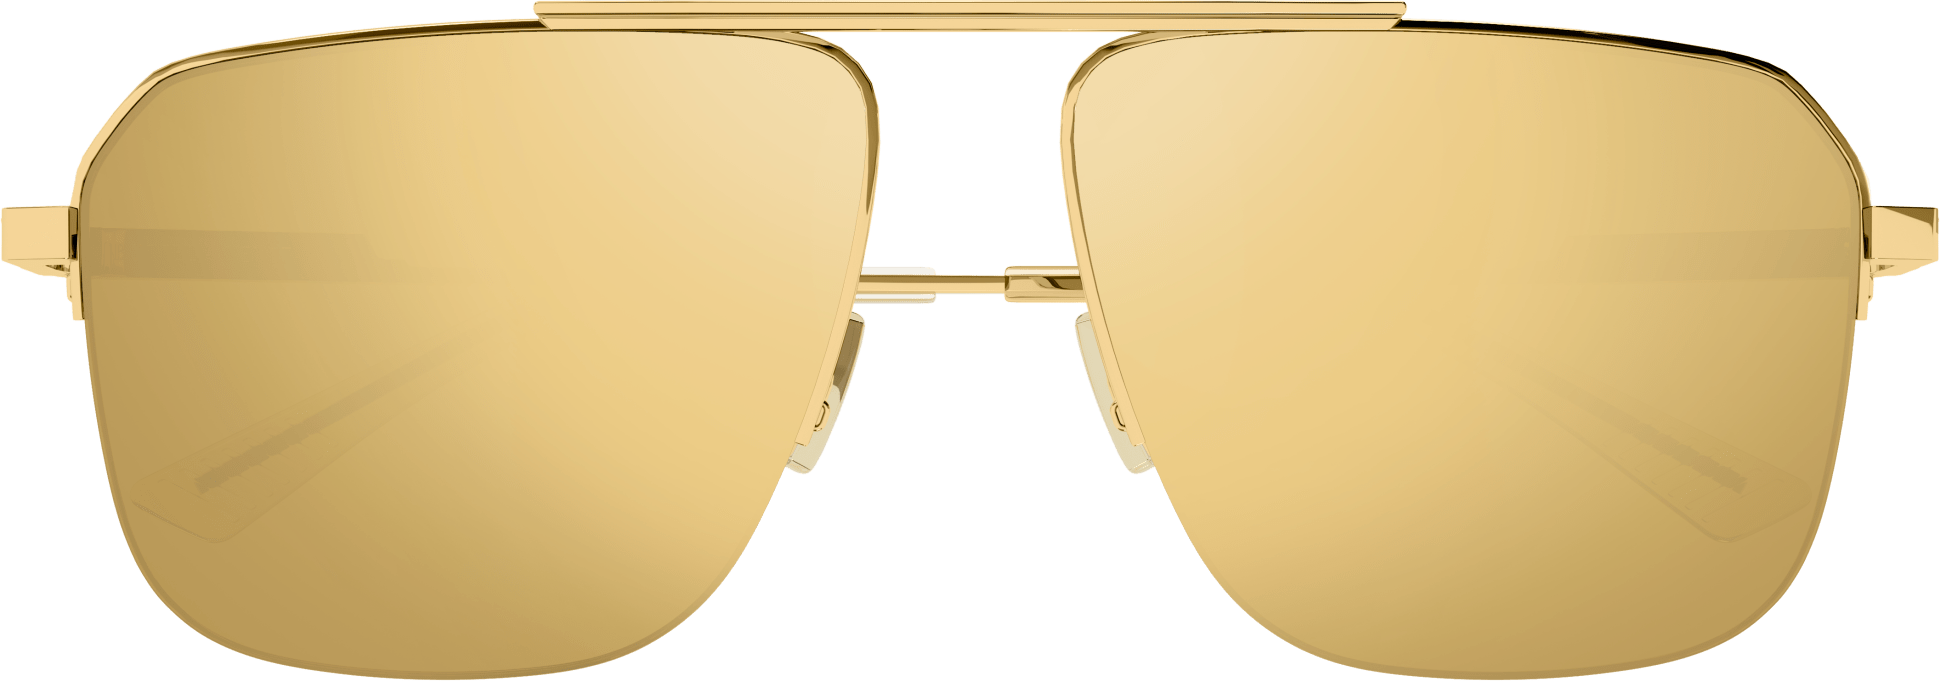 Color_BV1149S-005 - GOLD - GOLD - MIRROR